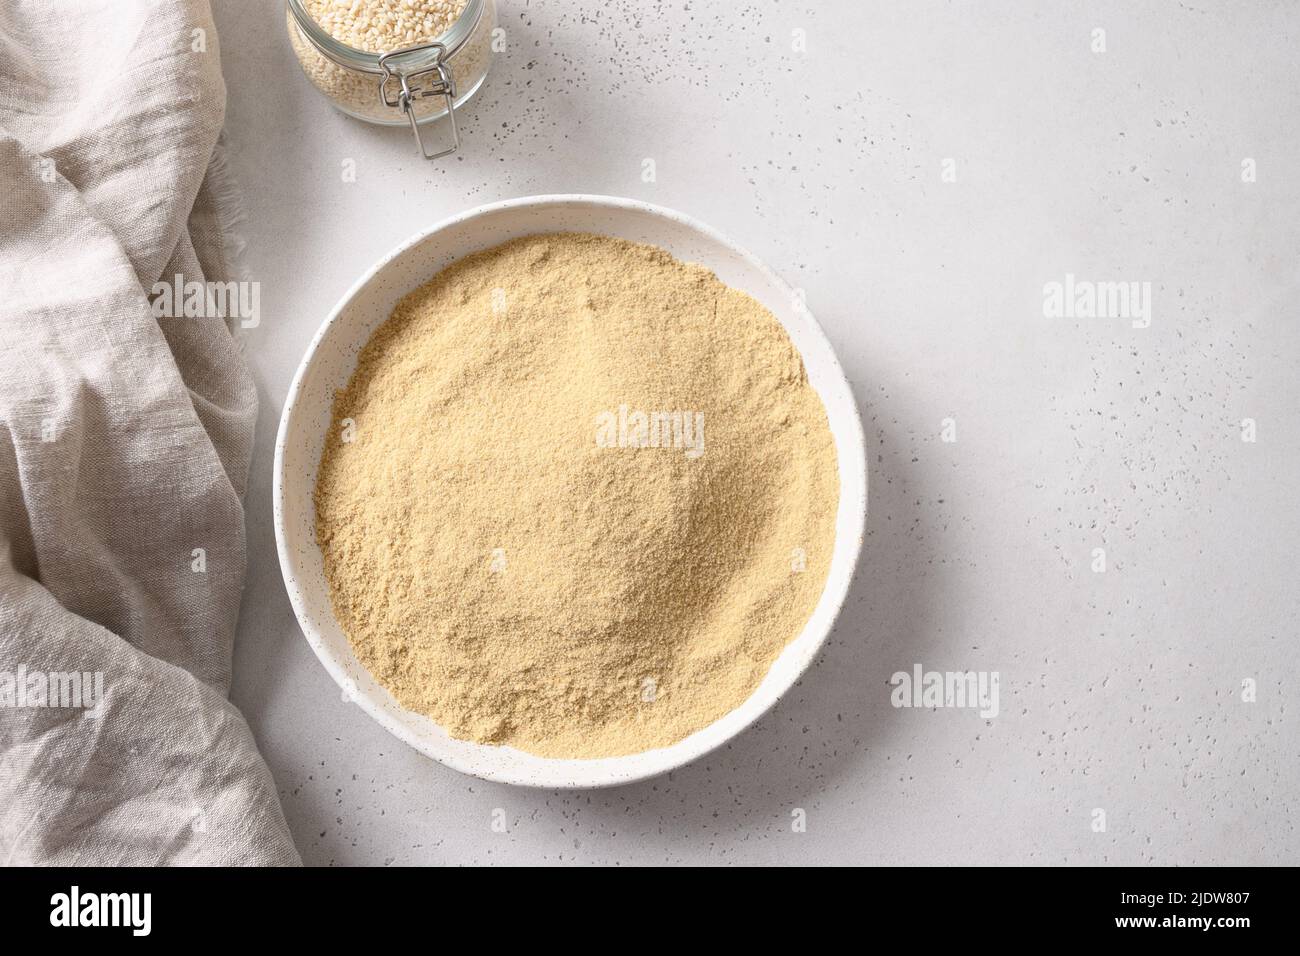 Sesame flour in white bowl and sesame seeds in spoon. Stock Photo